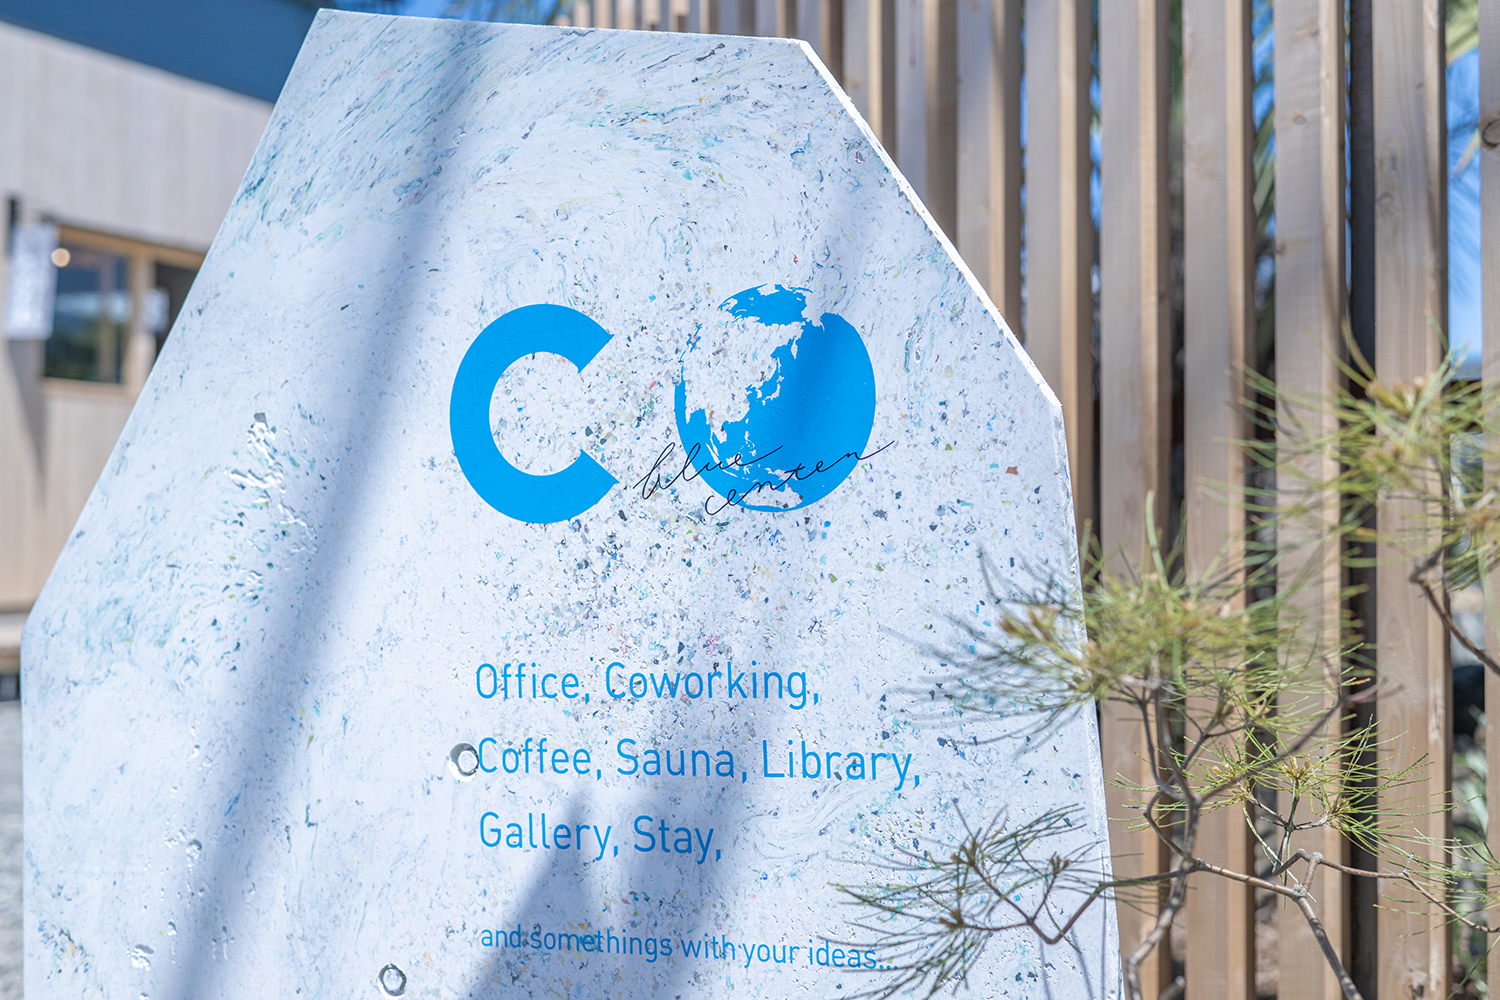 c_co_sign_02